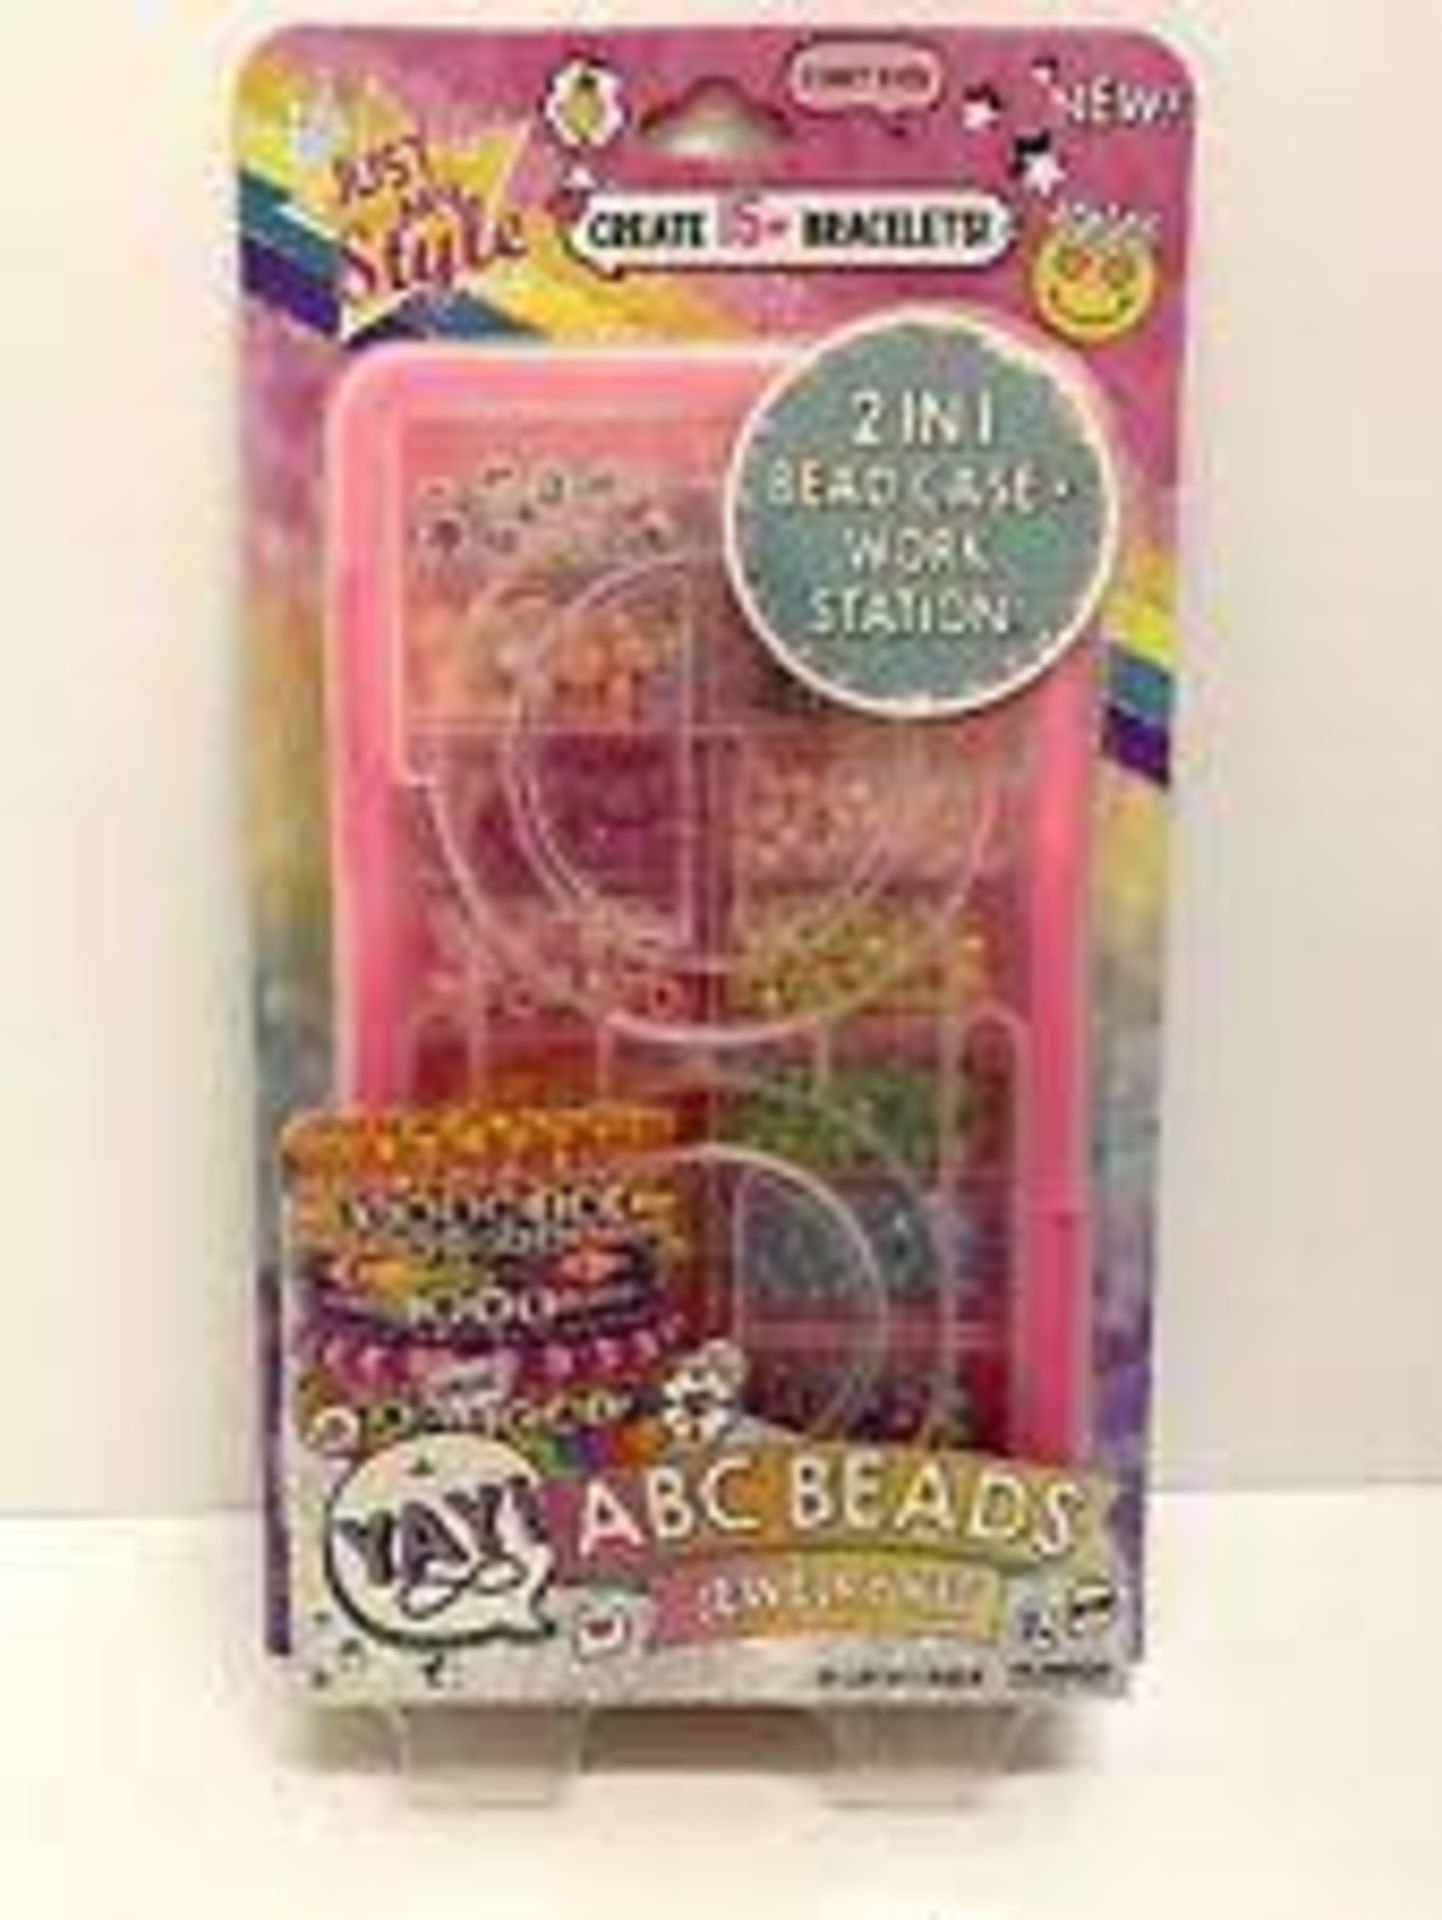 36 X NEW PACKAGED JUST MY STYLE 2 IN 1 BEAD CASE WORK STATION. ABC BEADS JEWELRY KIT. (ROW15RACK)